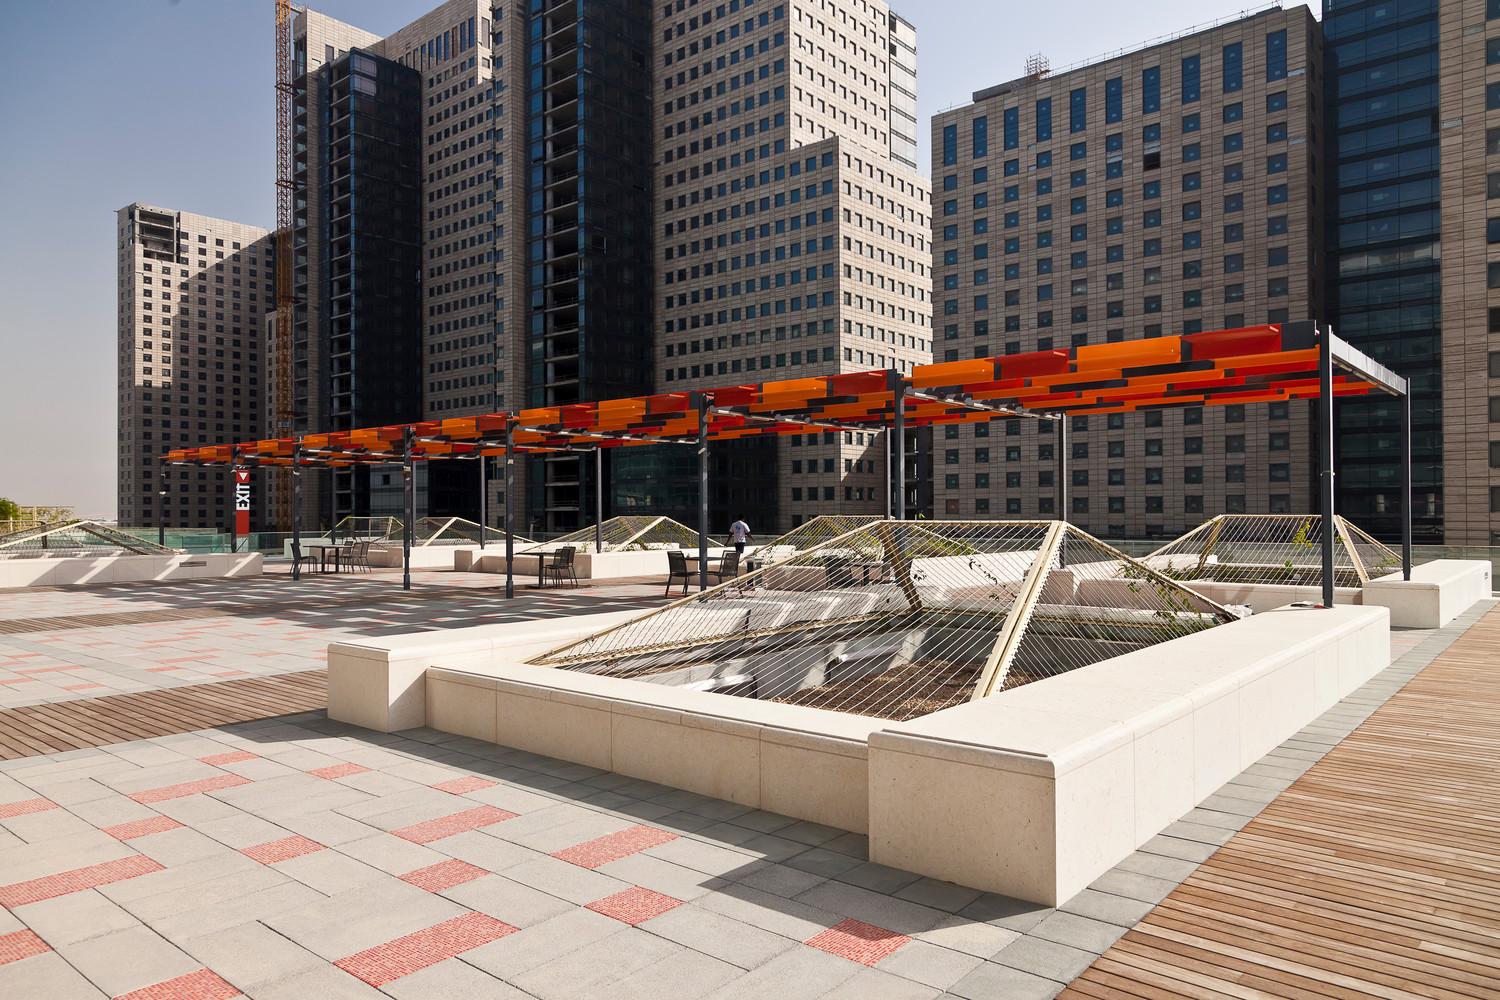 Rooftop Garden shade structure with mixed-use buildings in the back